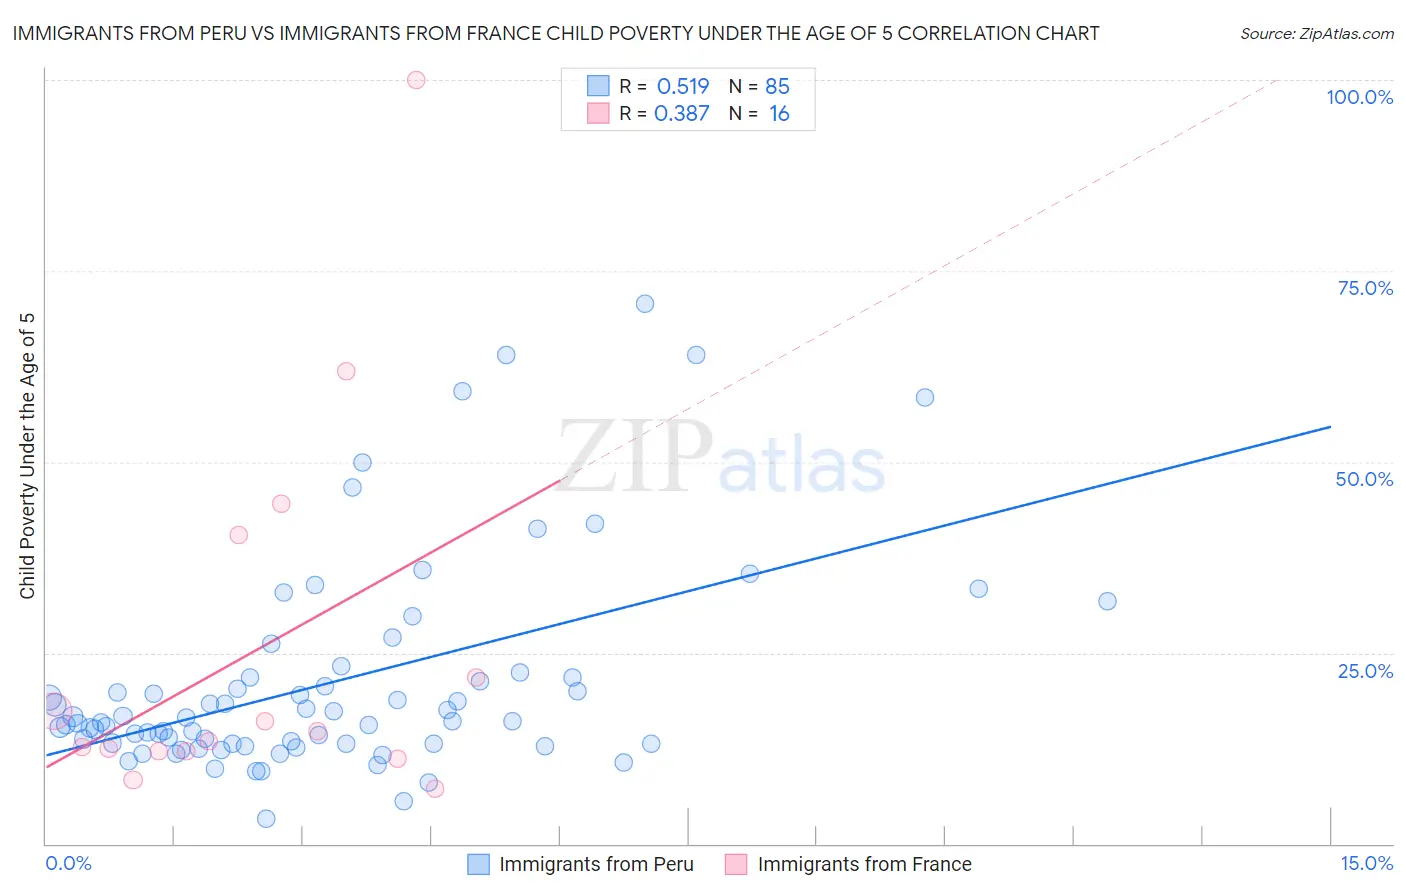 Immigrants from Peru vs Immigrants from France Child Poverty Under the Age of 5